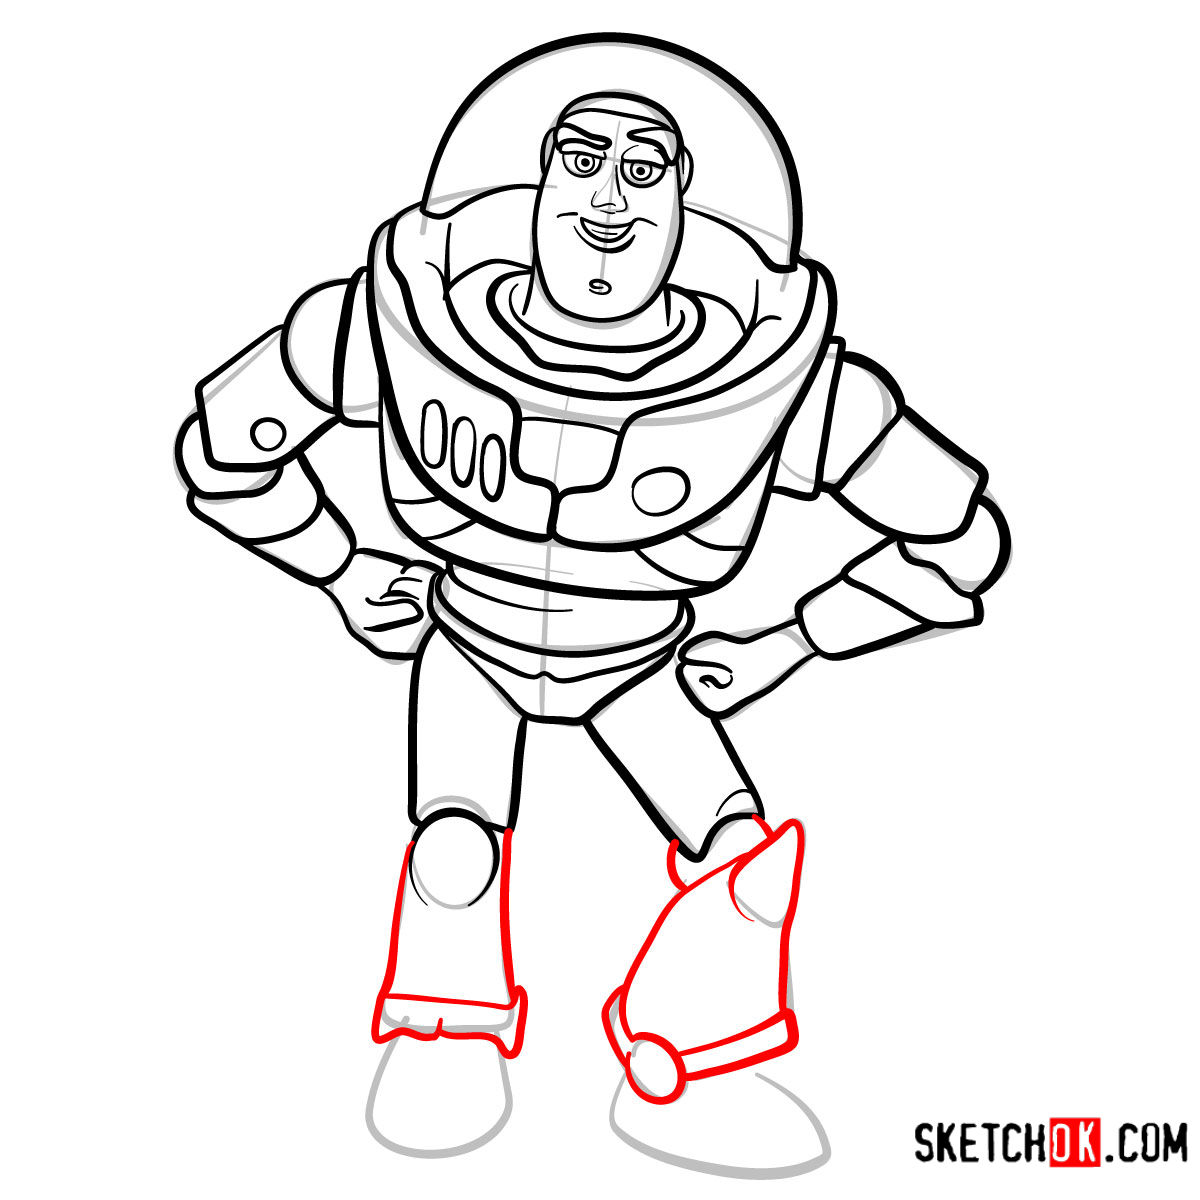 How to draw Buzz Lightyear Toy Story Sketchok easy drawing guides